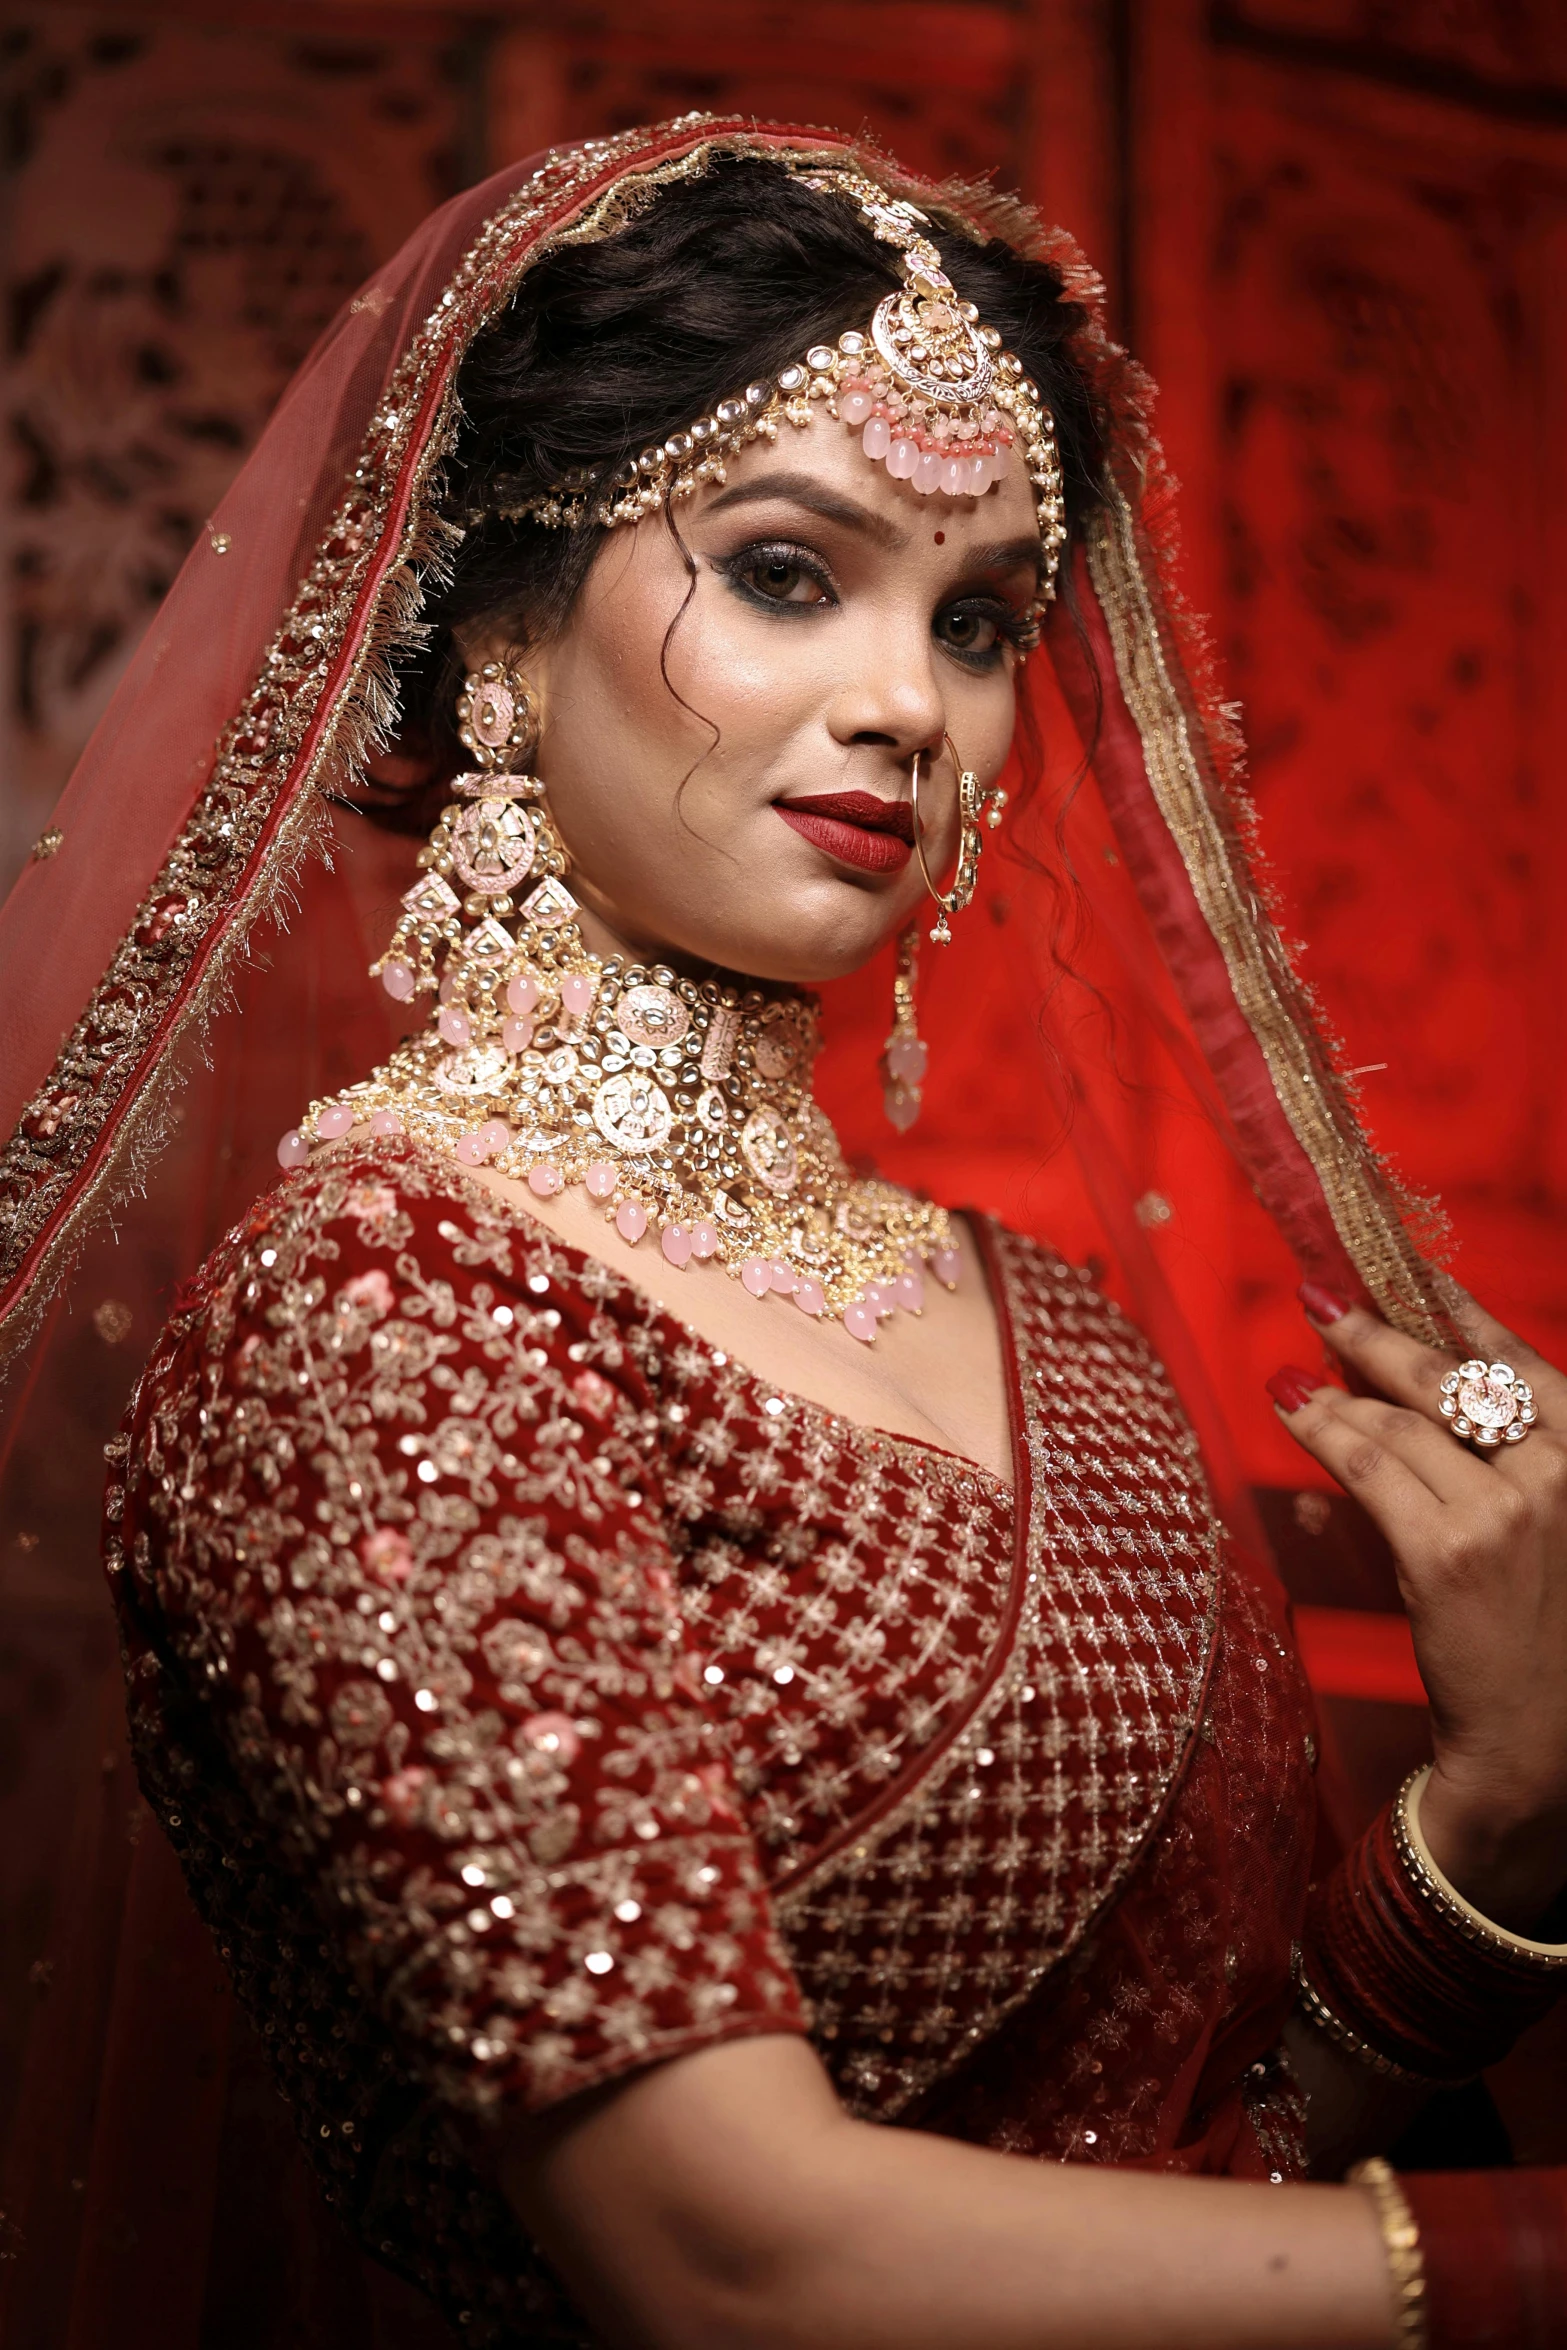 a young woman poses in her bridal dress